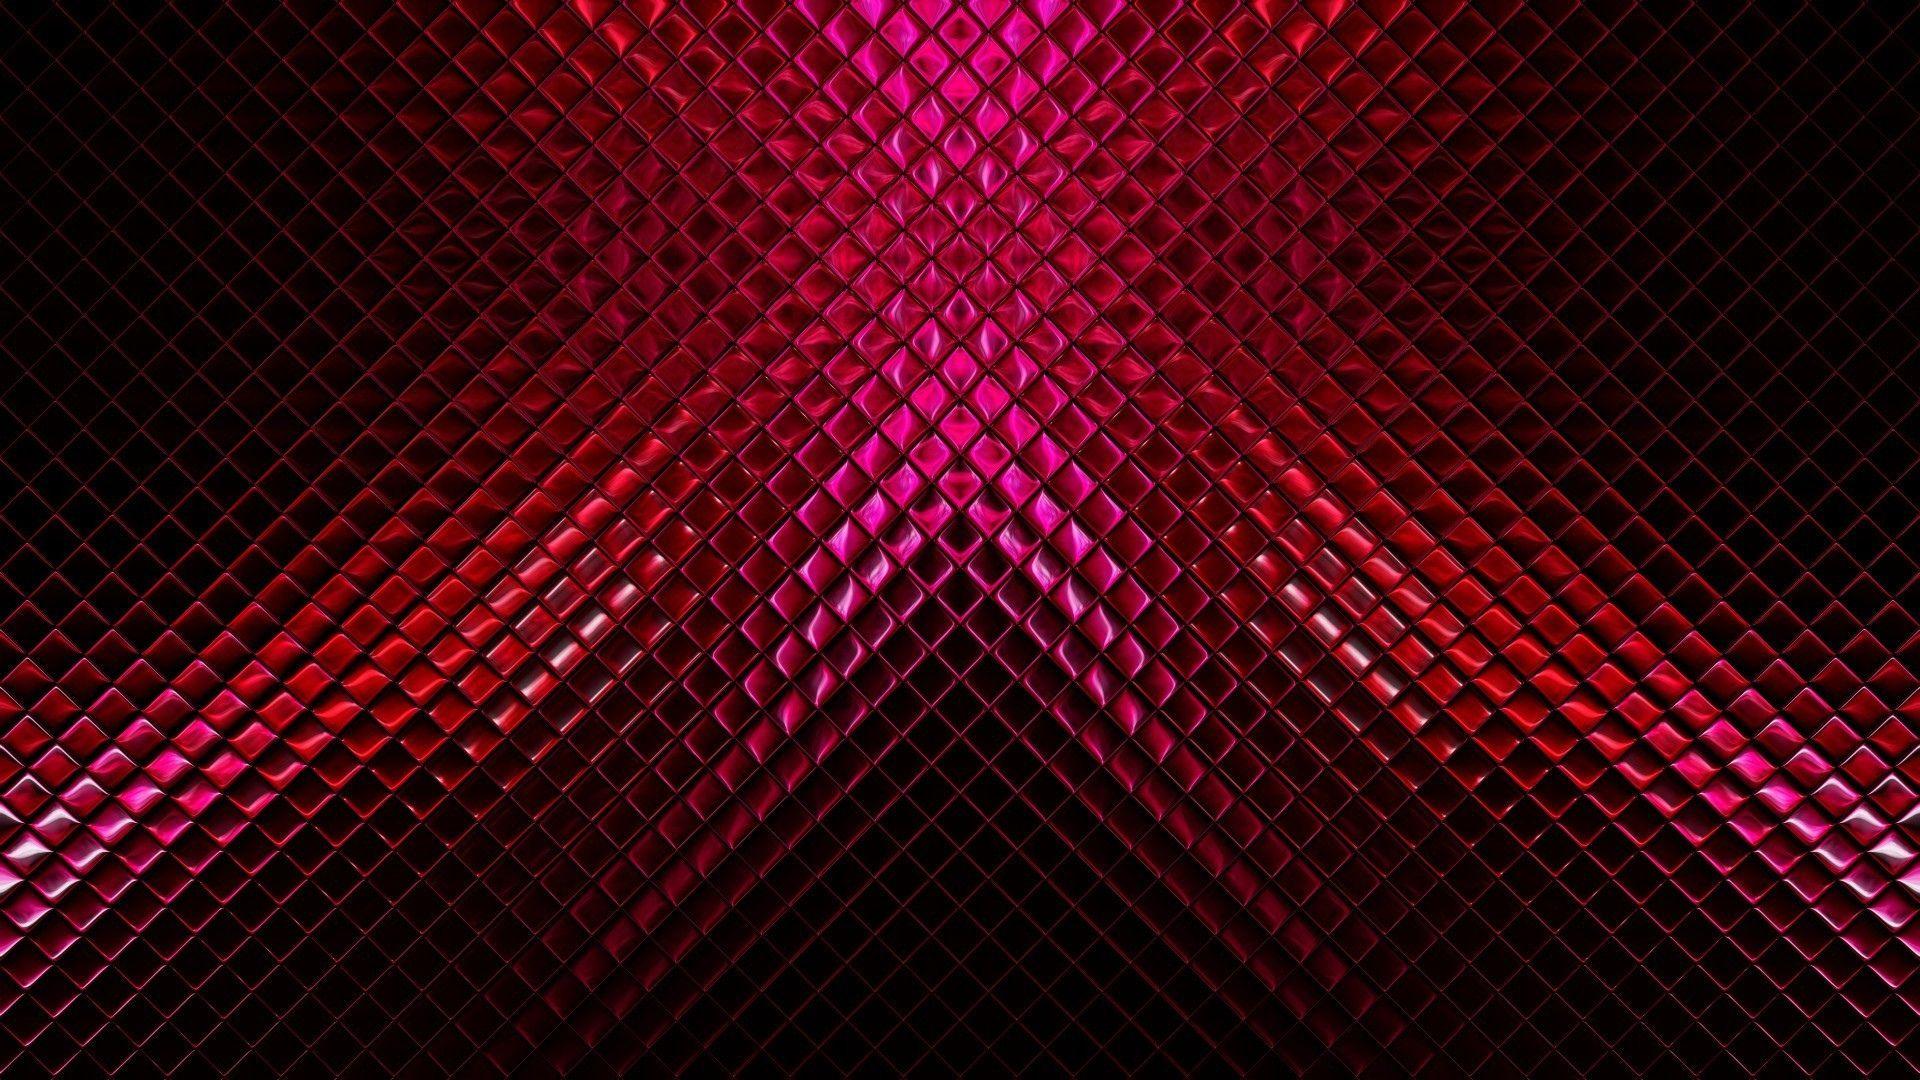 Black and Red Metal Wallpapers - Top Free Black and Red Metal ...